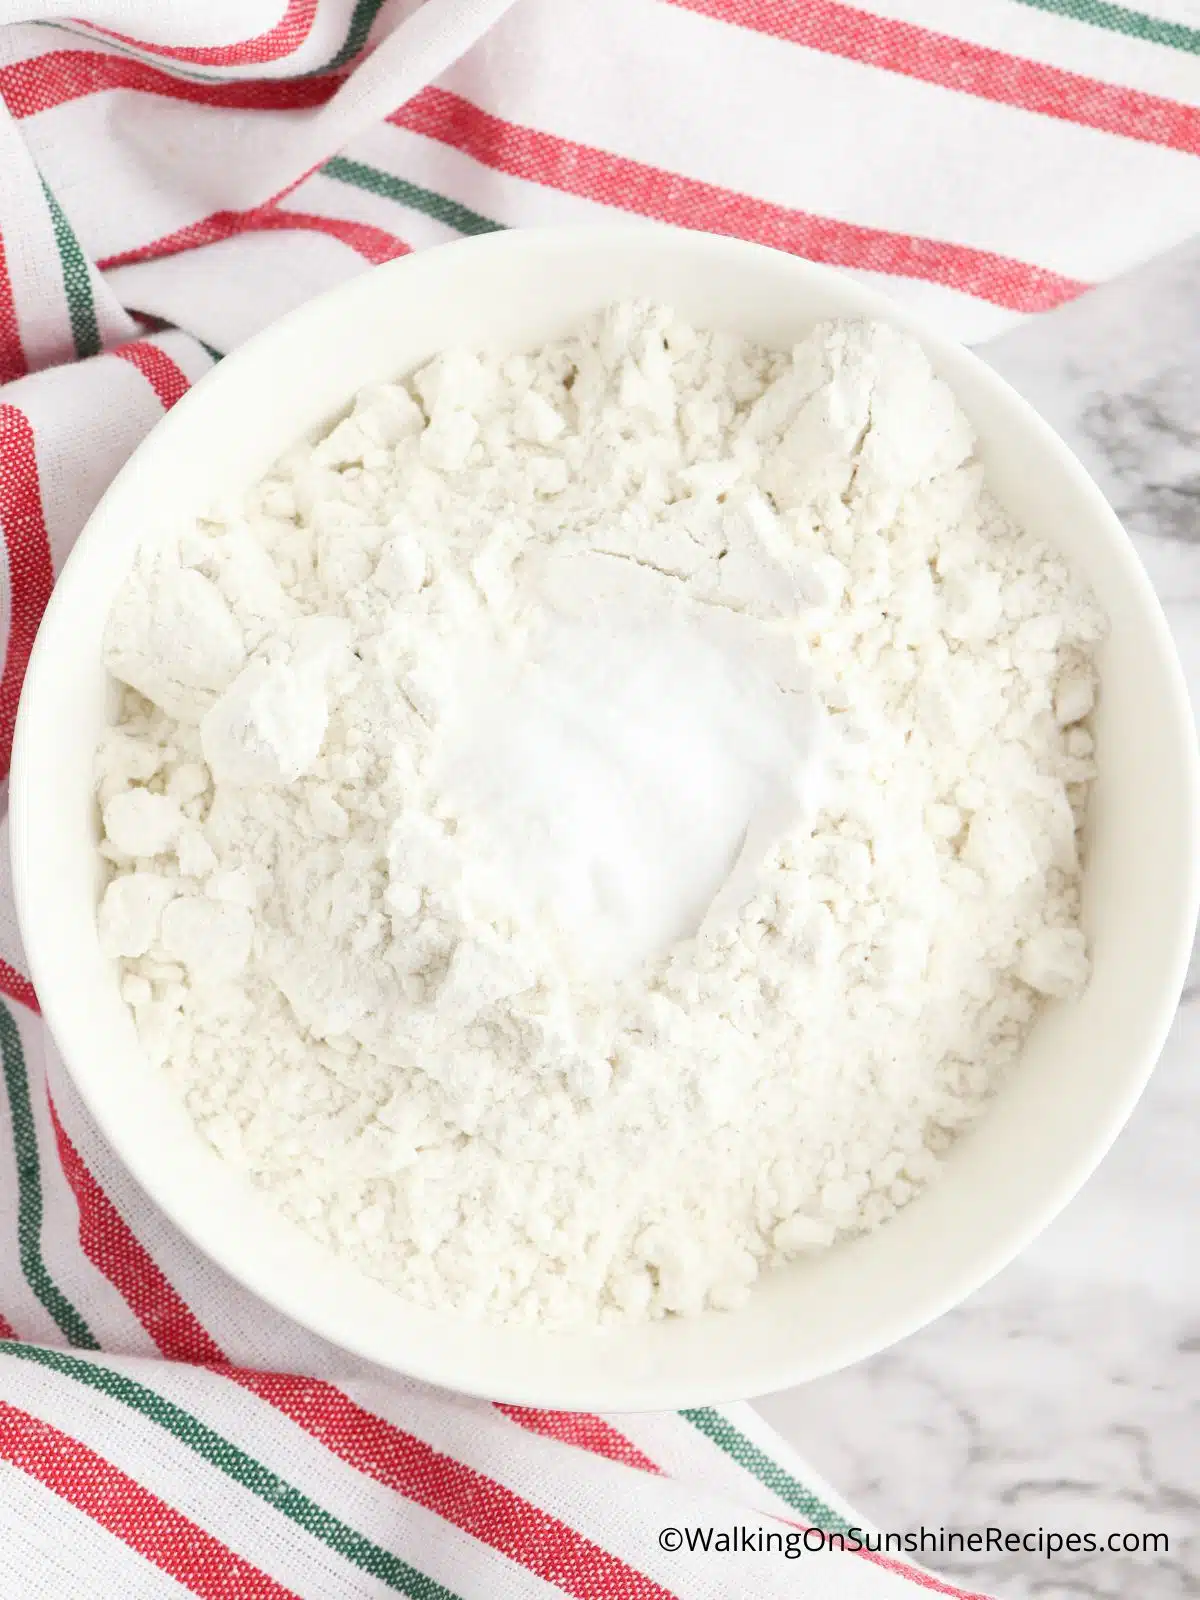 Combine flour with baking soda and salt.